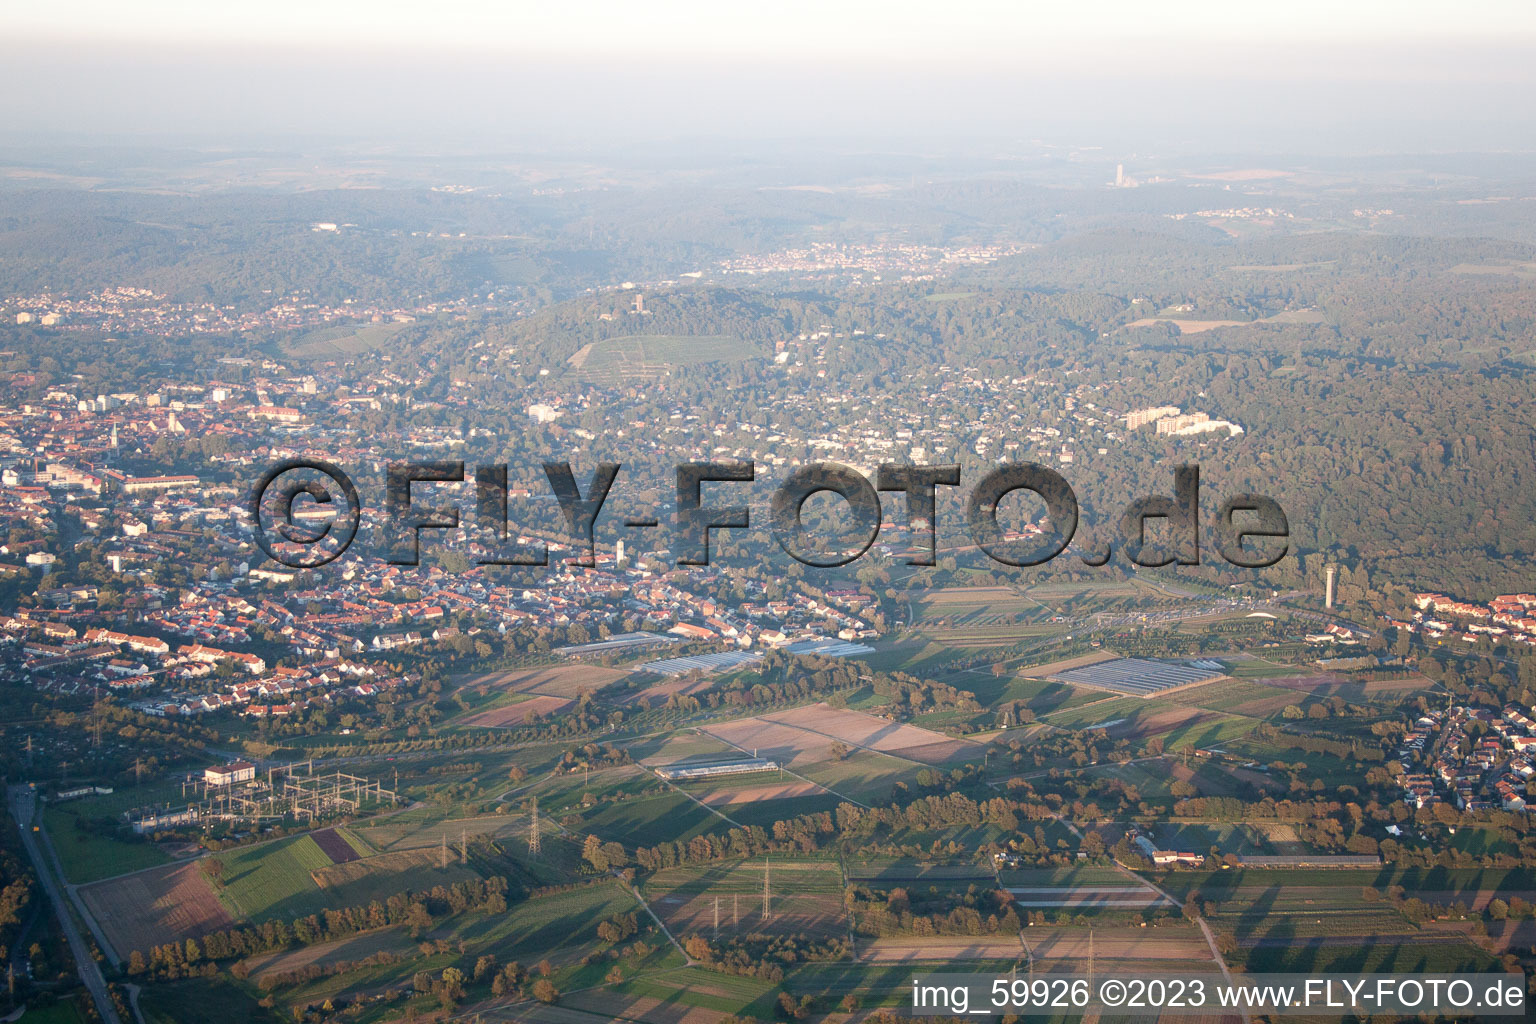 Tower Mountain in the district Durlach in Karlsruhe in the state Baden-Wuerttemberg, Germany from the plane